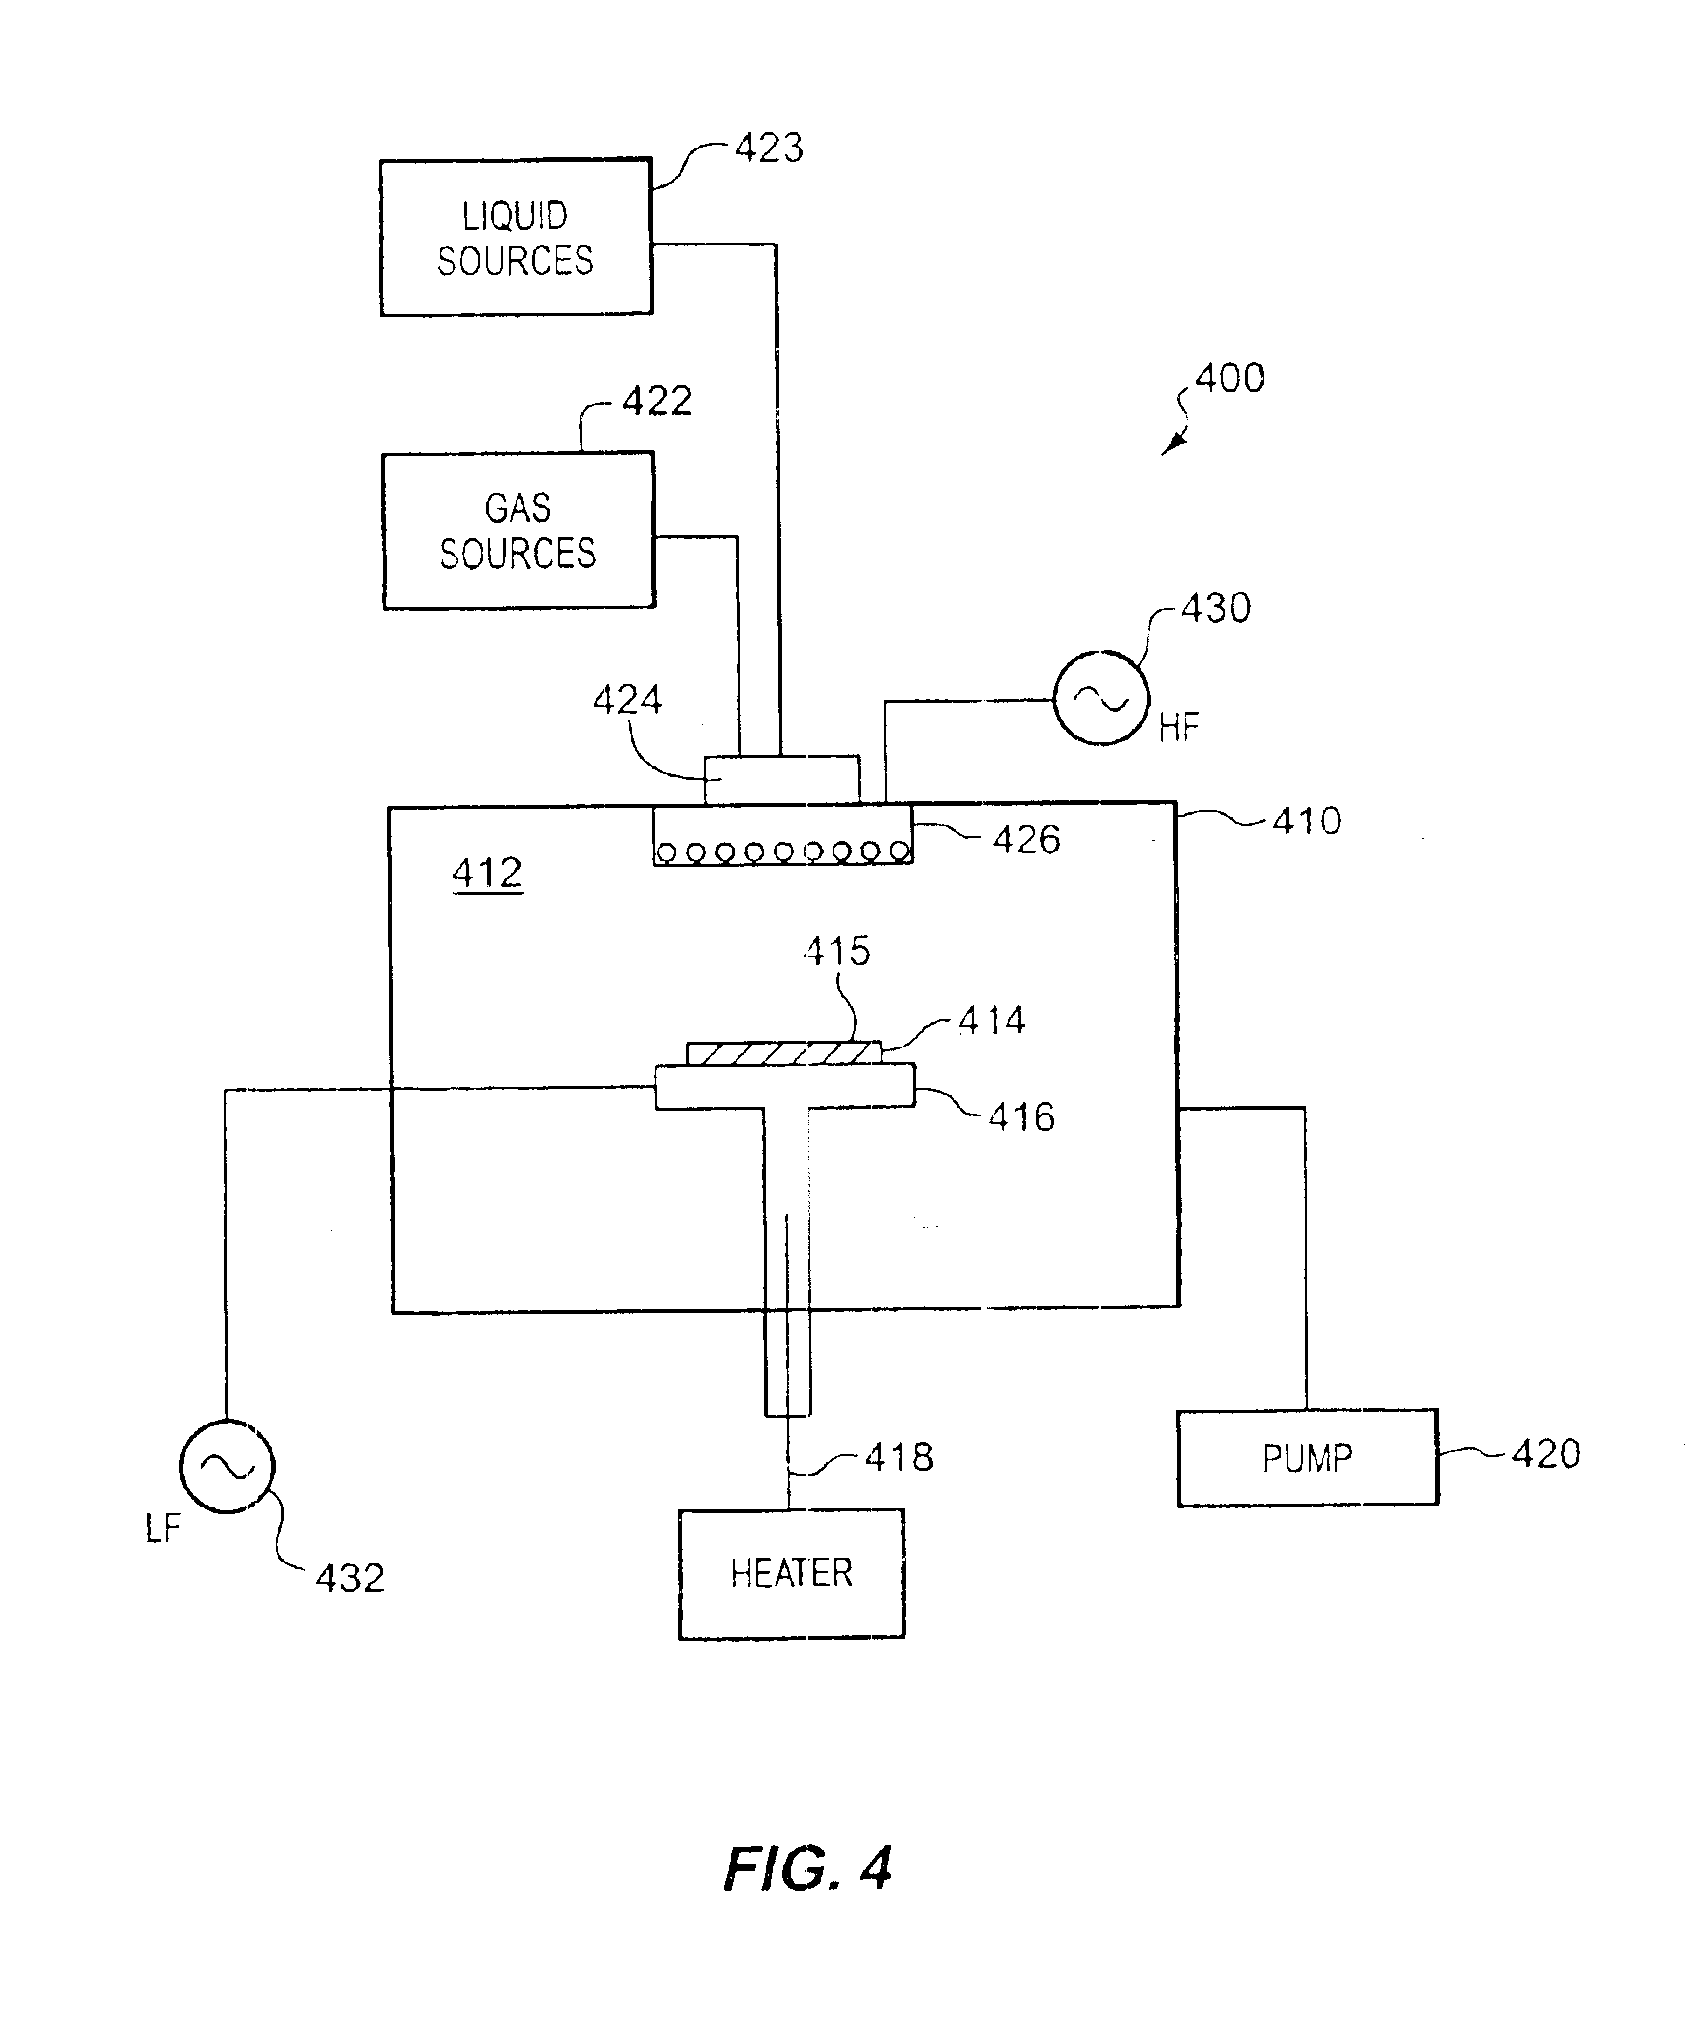 Silicon carbide having low dielectric constant